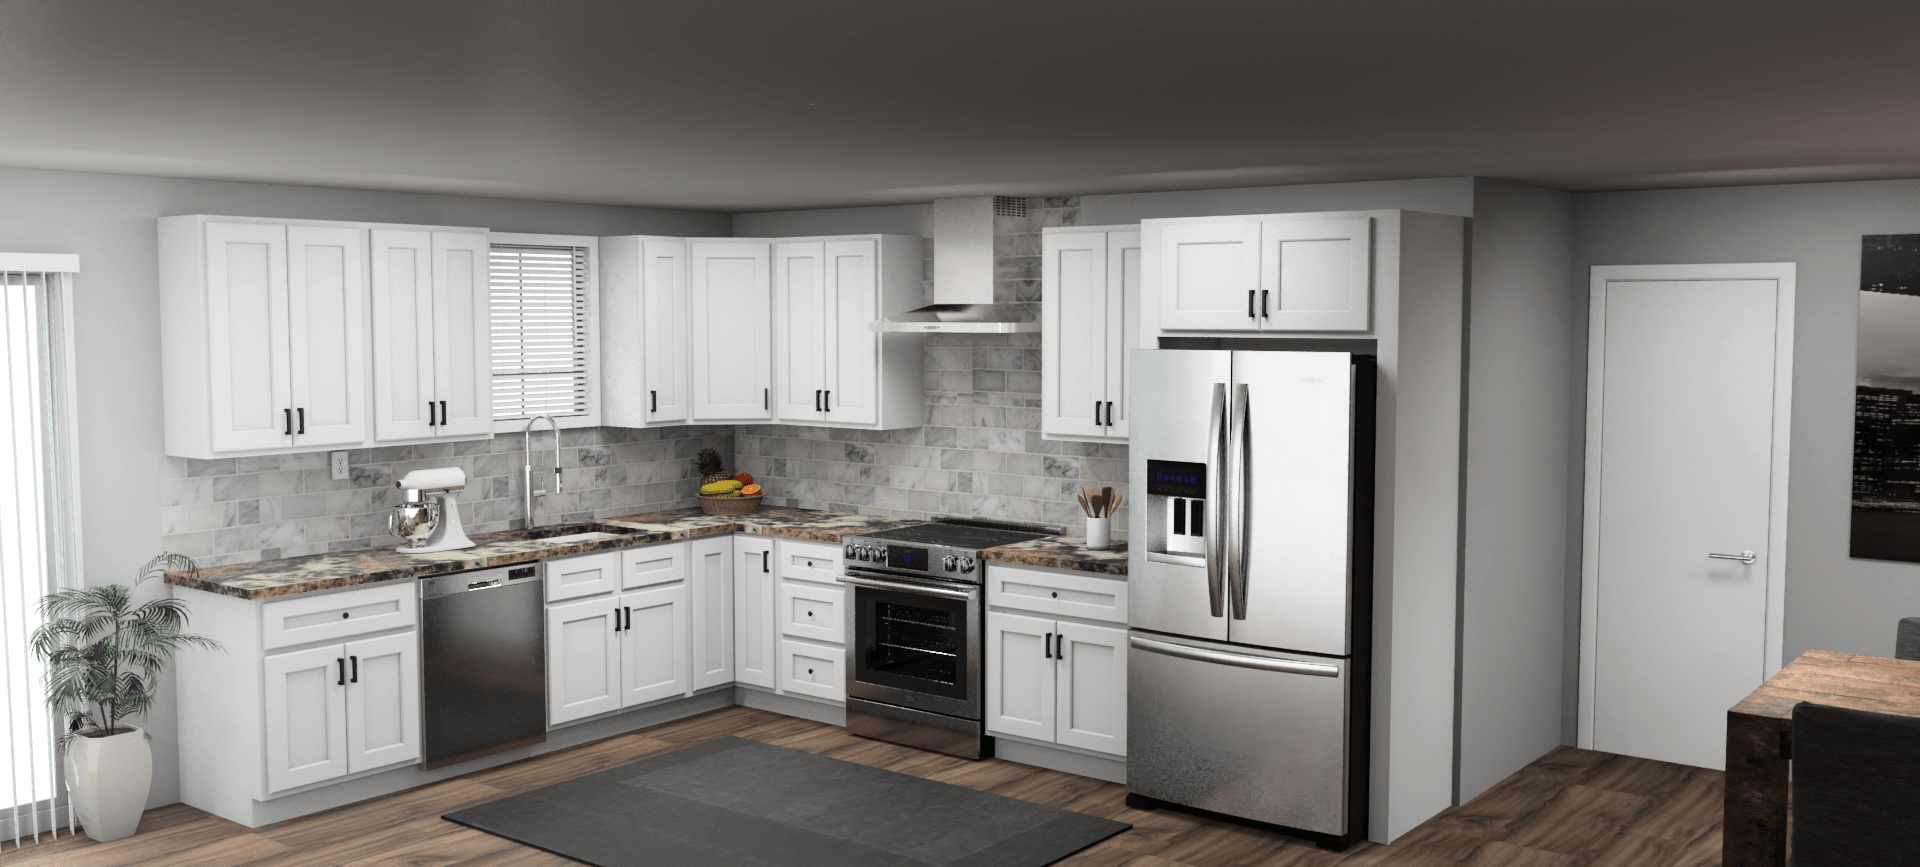 Fabuwood Quest Metro Frost 10 x 13 L Shaped Kitchen | Cabinets